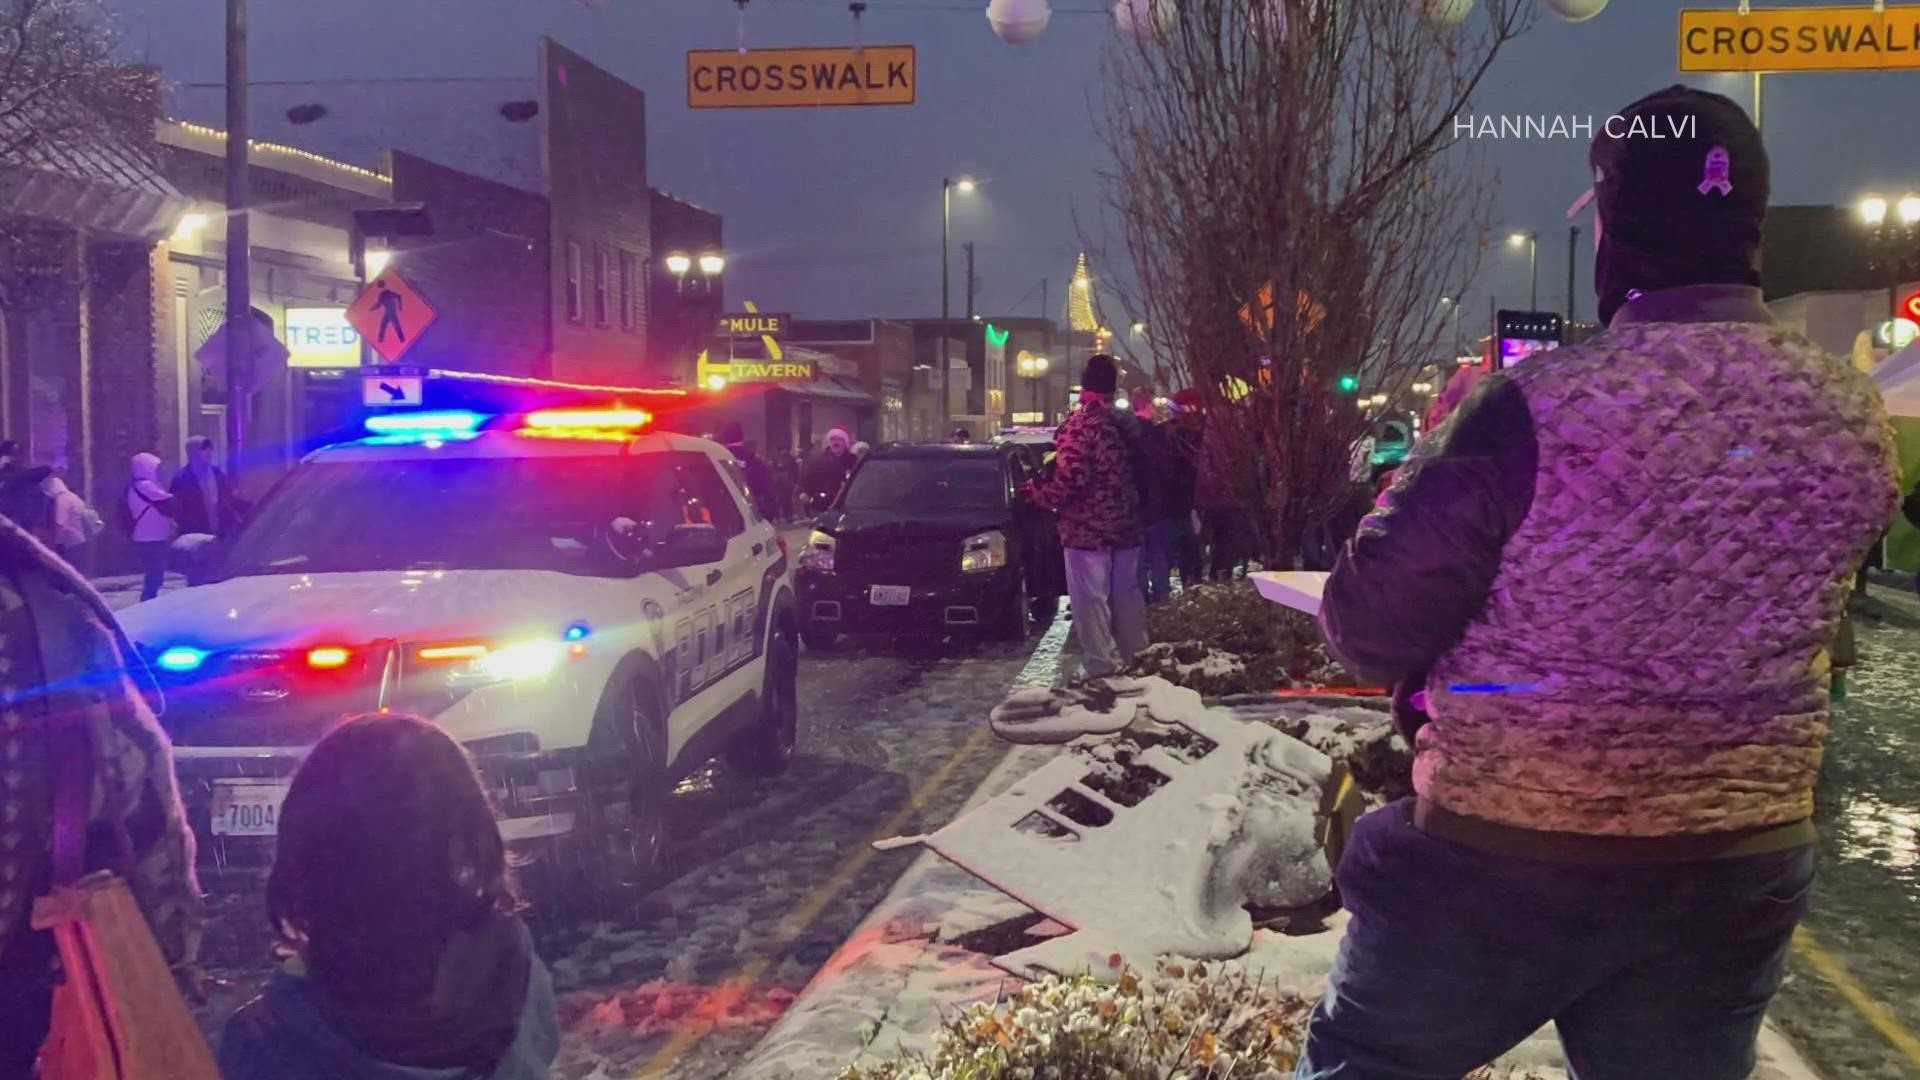 After hundreds were left rattled when a car drove erratically through crowds on a parade route, the community is taking a closer look at security enhancements.